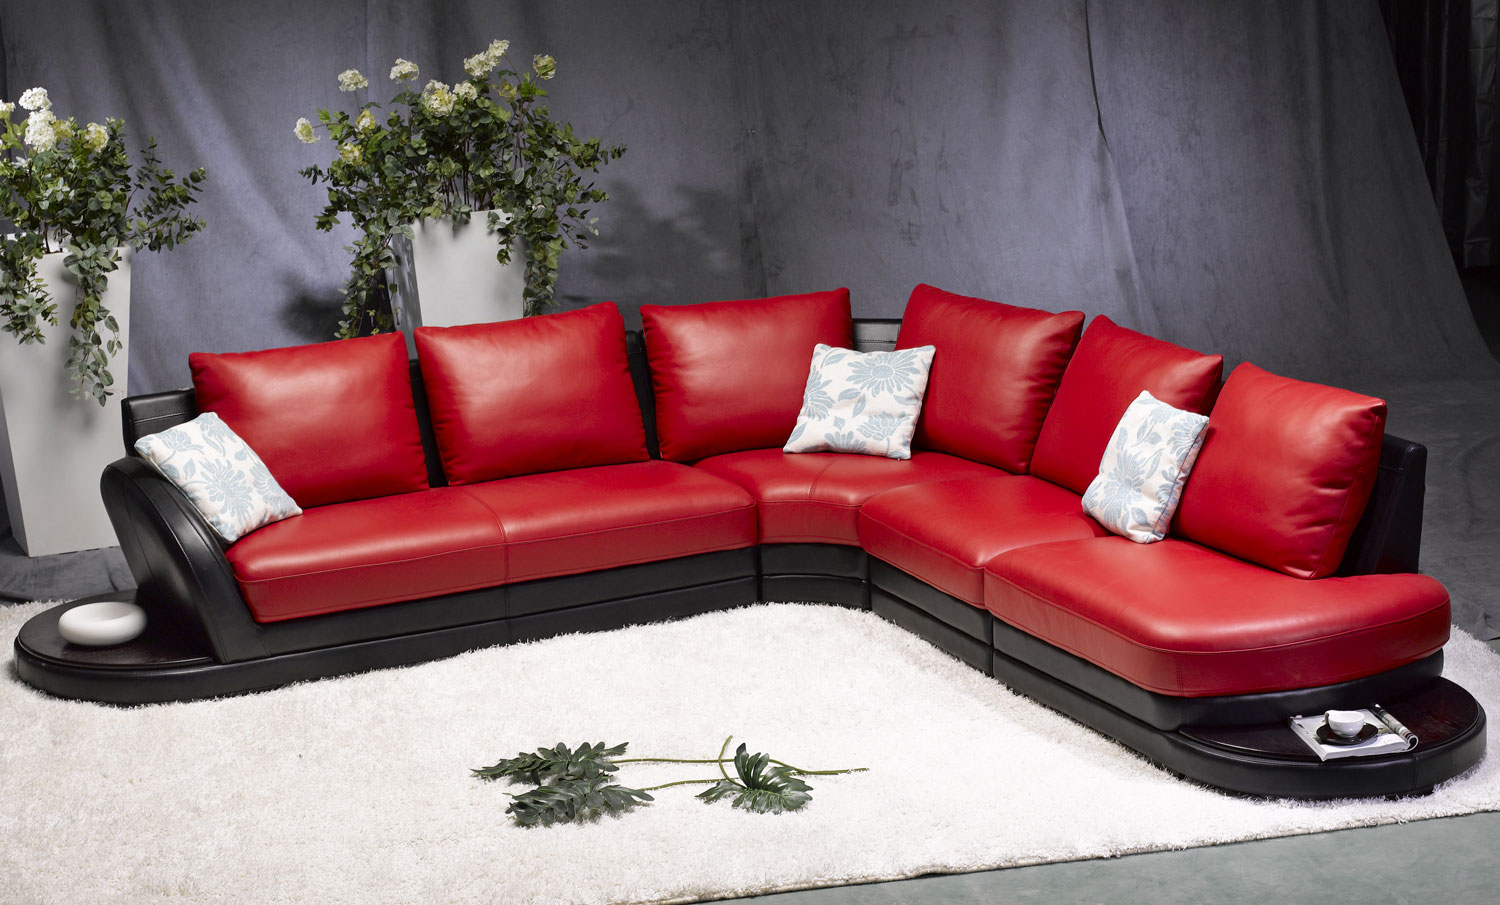 Classic Living With Astonishing Classic Living Room Design With Red Leather Sofa Several White Pillows And White Colored Fur Carpet Furniture Outstanding Living Room Furnished With A Red Leather Couch Or Sofa Sets